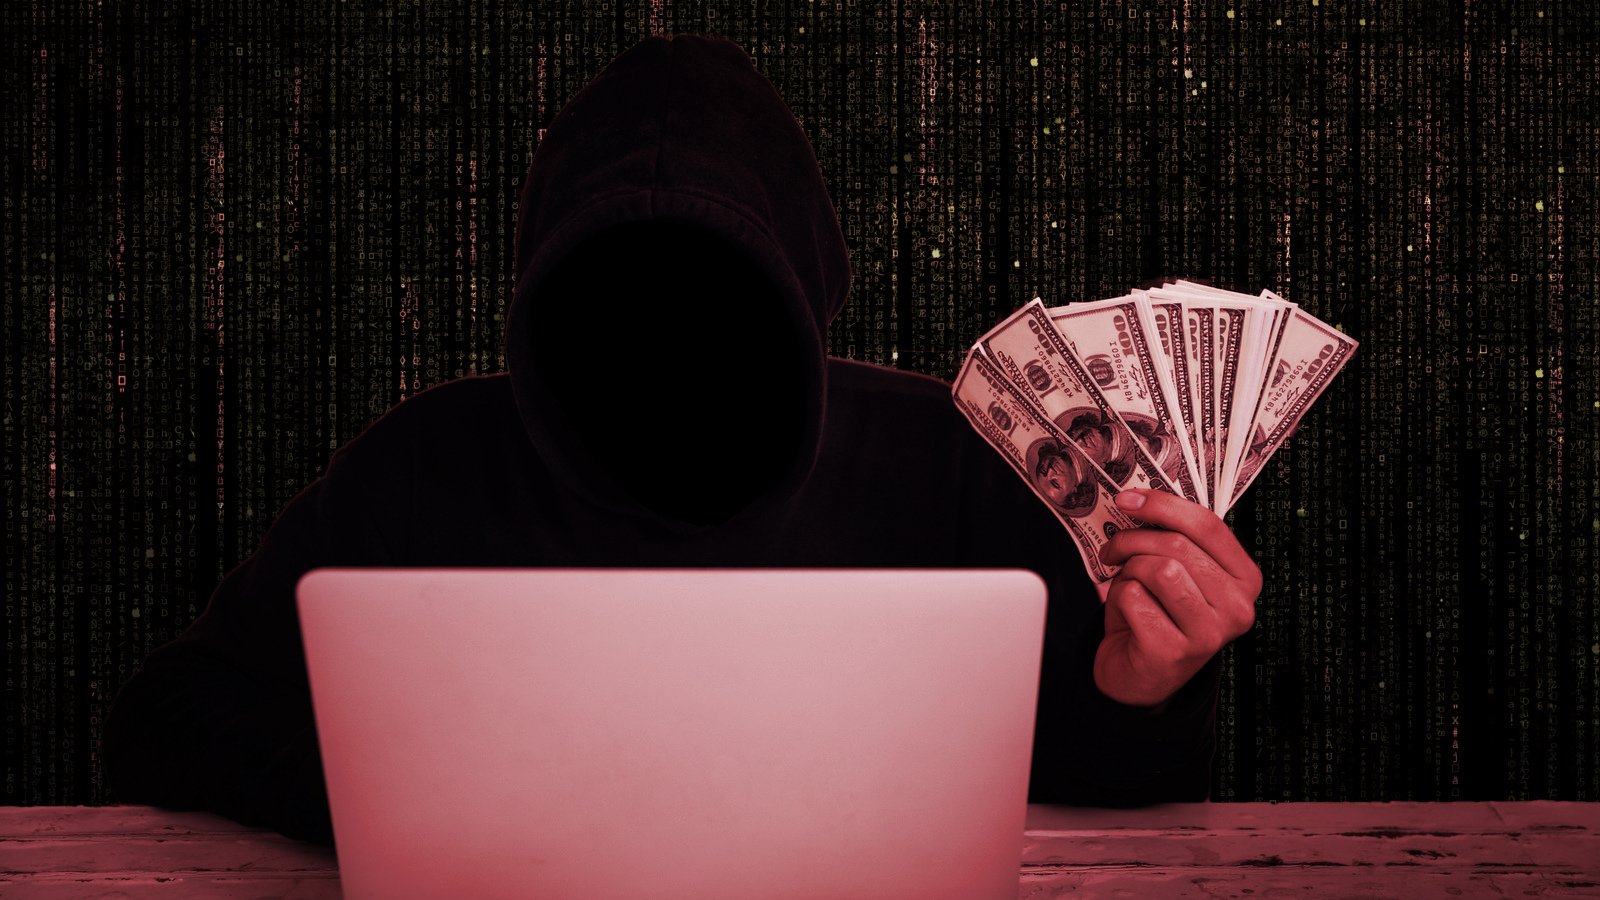 Harmony Offers $1M Bounty After Discovering $100M Altcoin Hack